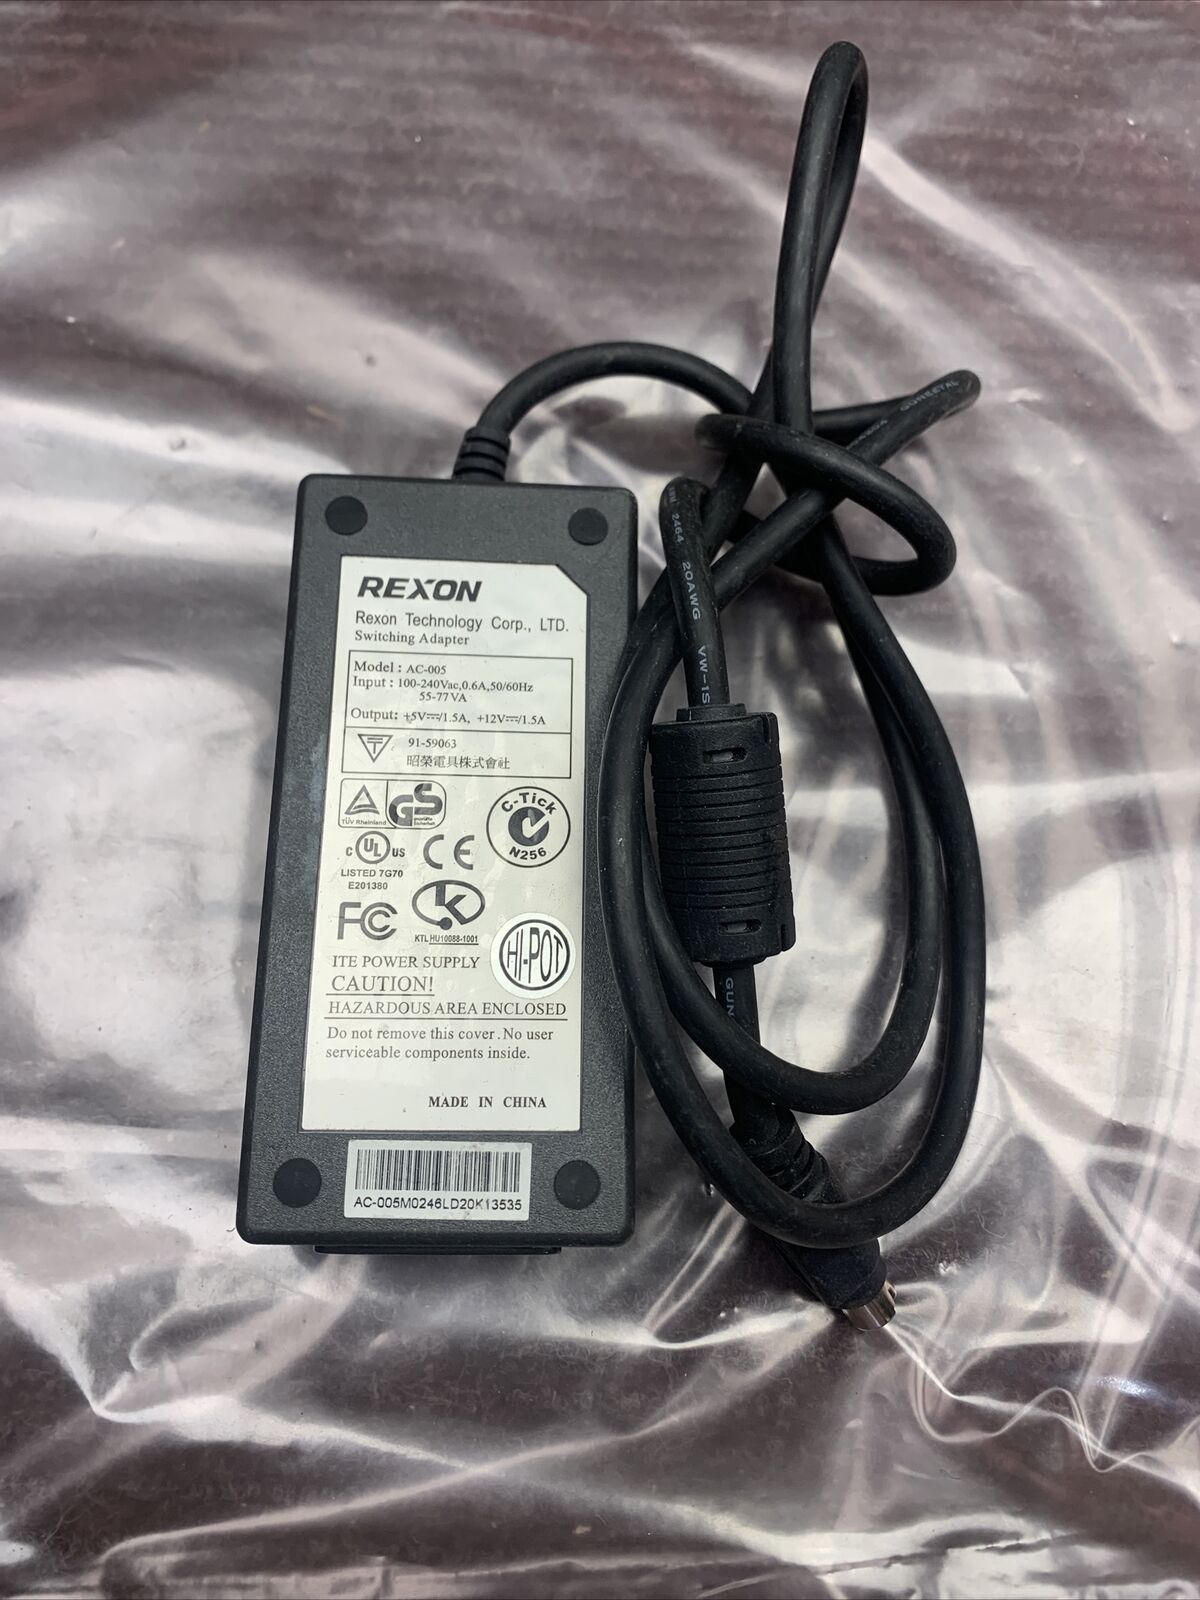 REXON AC-005 5V 12V Switching Power Supply AC Adapter Brand: Rexon Type: AC/AC Adapter Connection Split/Duplication